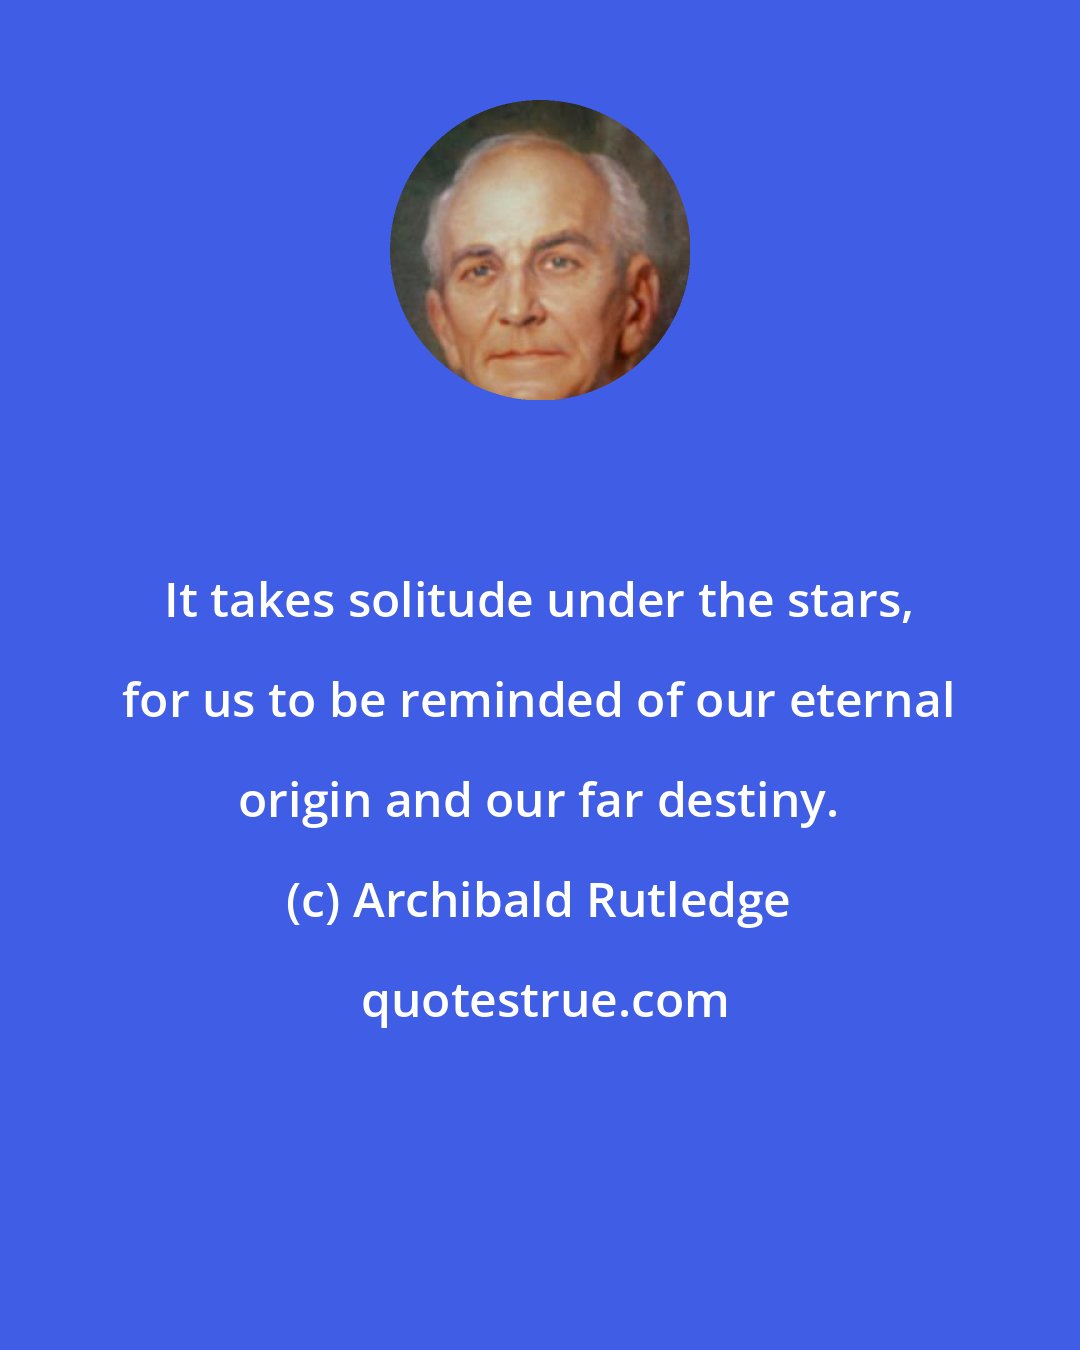 Archibald Rutledge: It takes solitude under the stars, for us to be reminded of our eternal origin and our far destiny.